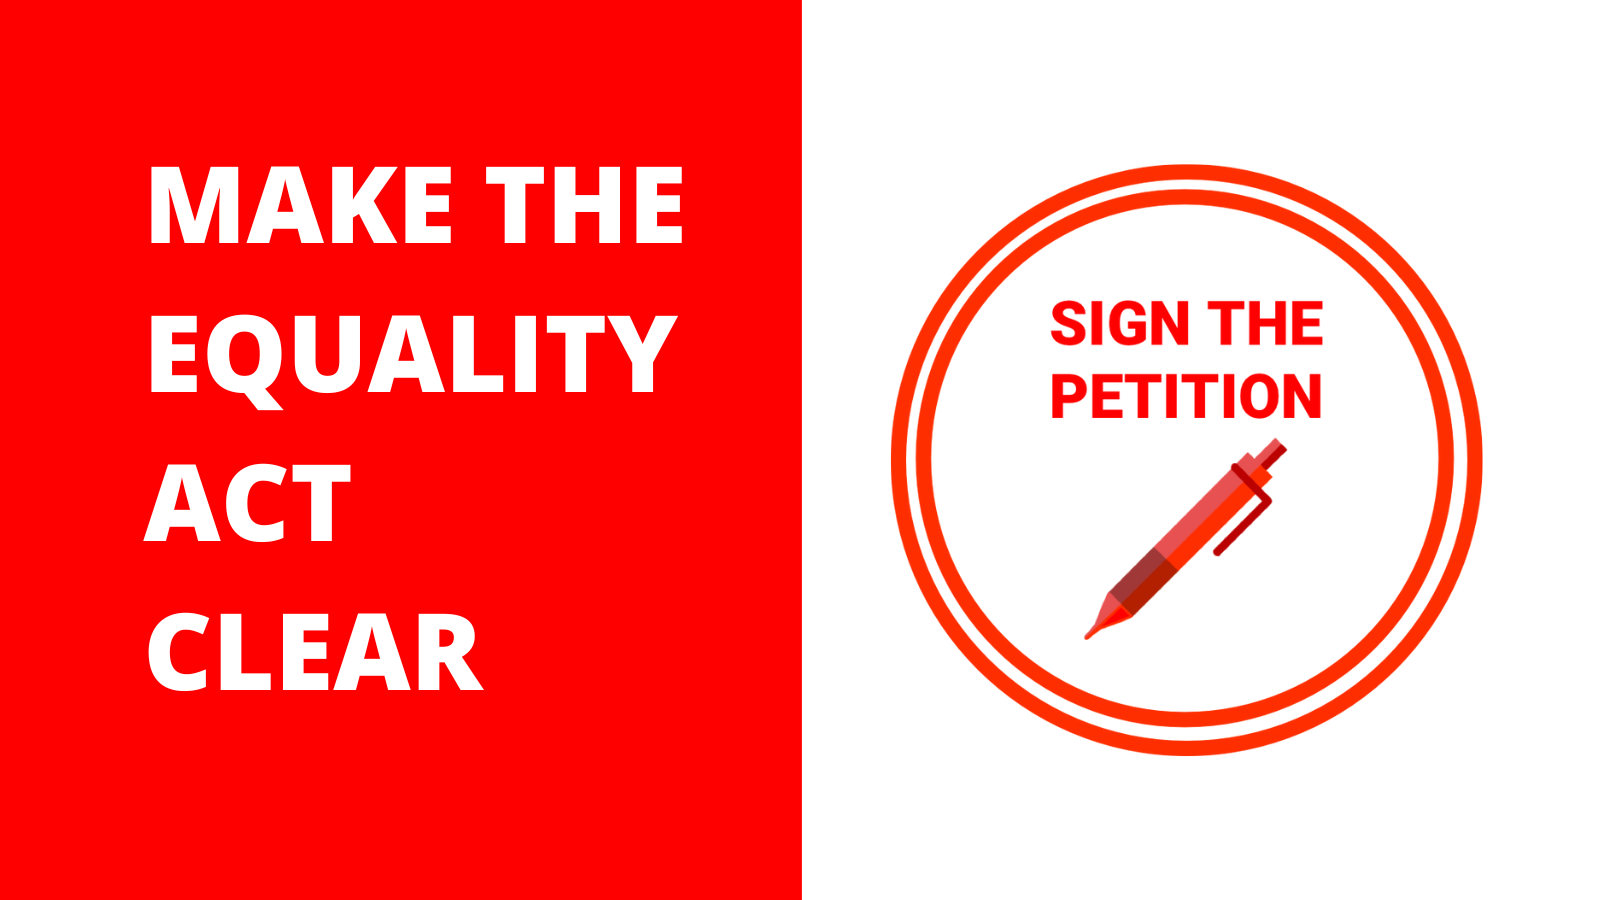 Make the Equality Act clear – sign the petition